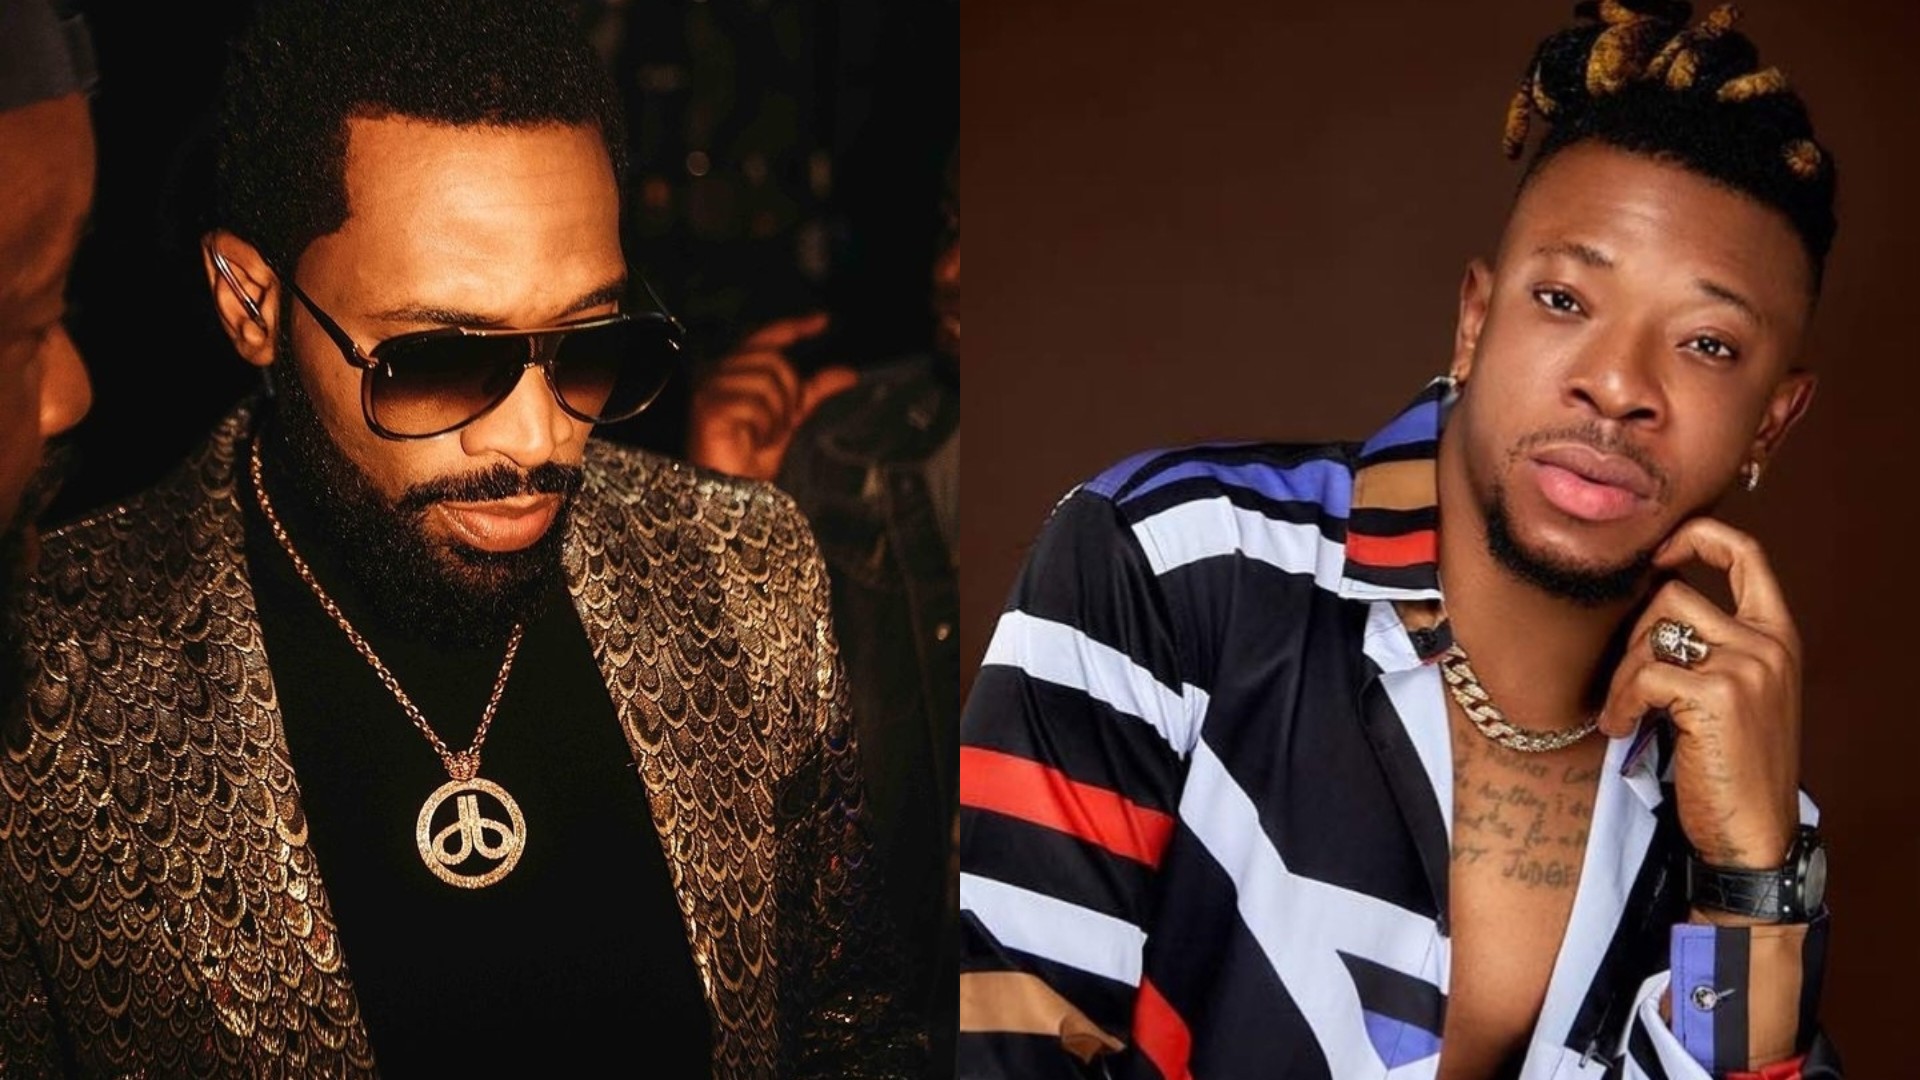 You’ll not know peace until you pay my money – Singer Mr. Real calls out D’Banj again over alleged outstanding debt (Video)